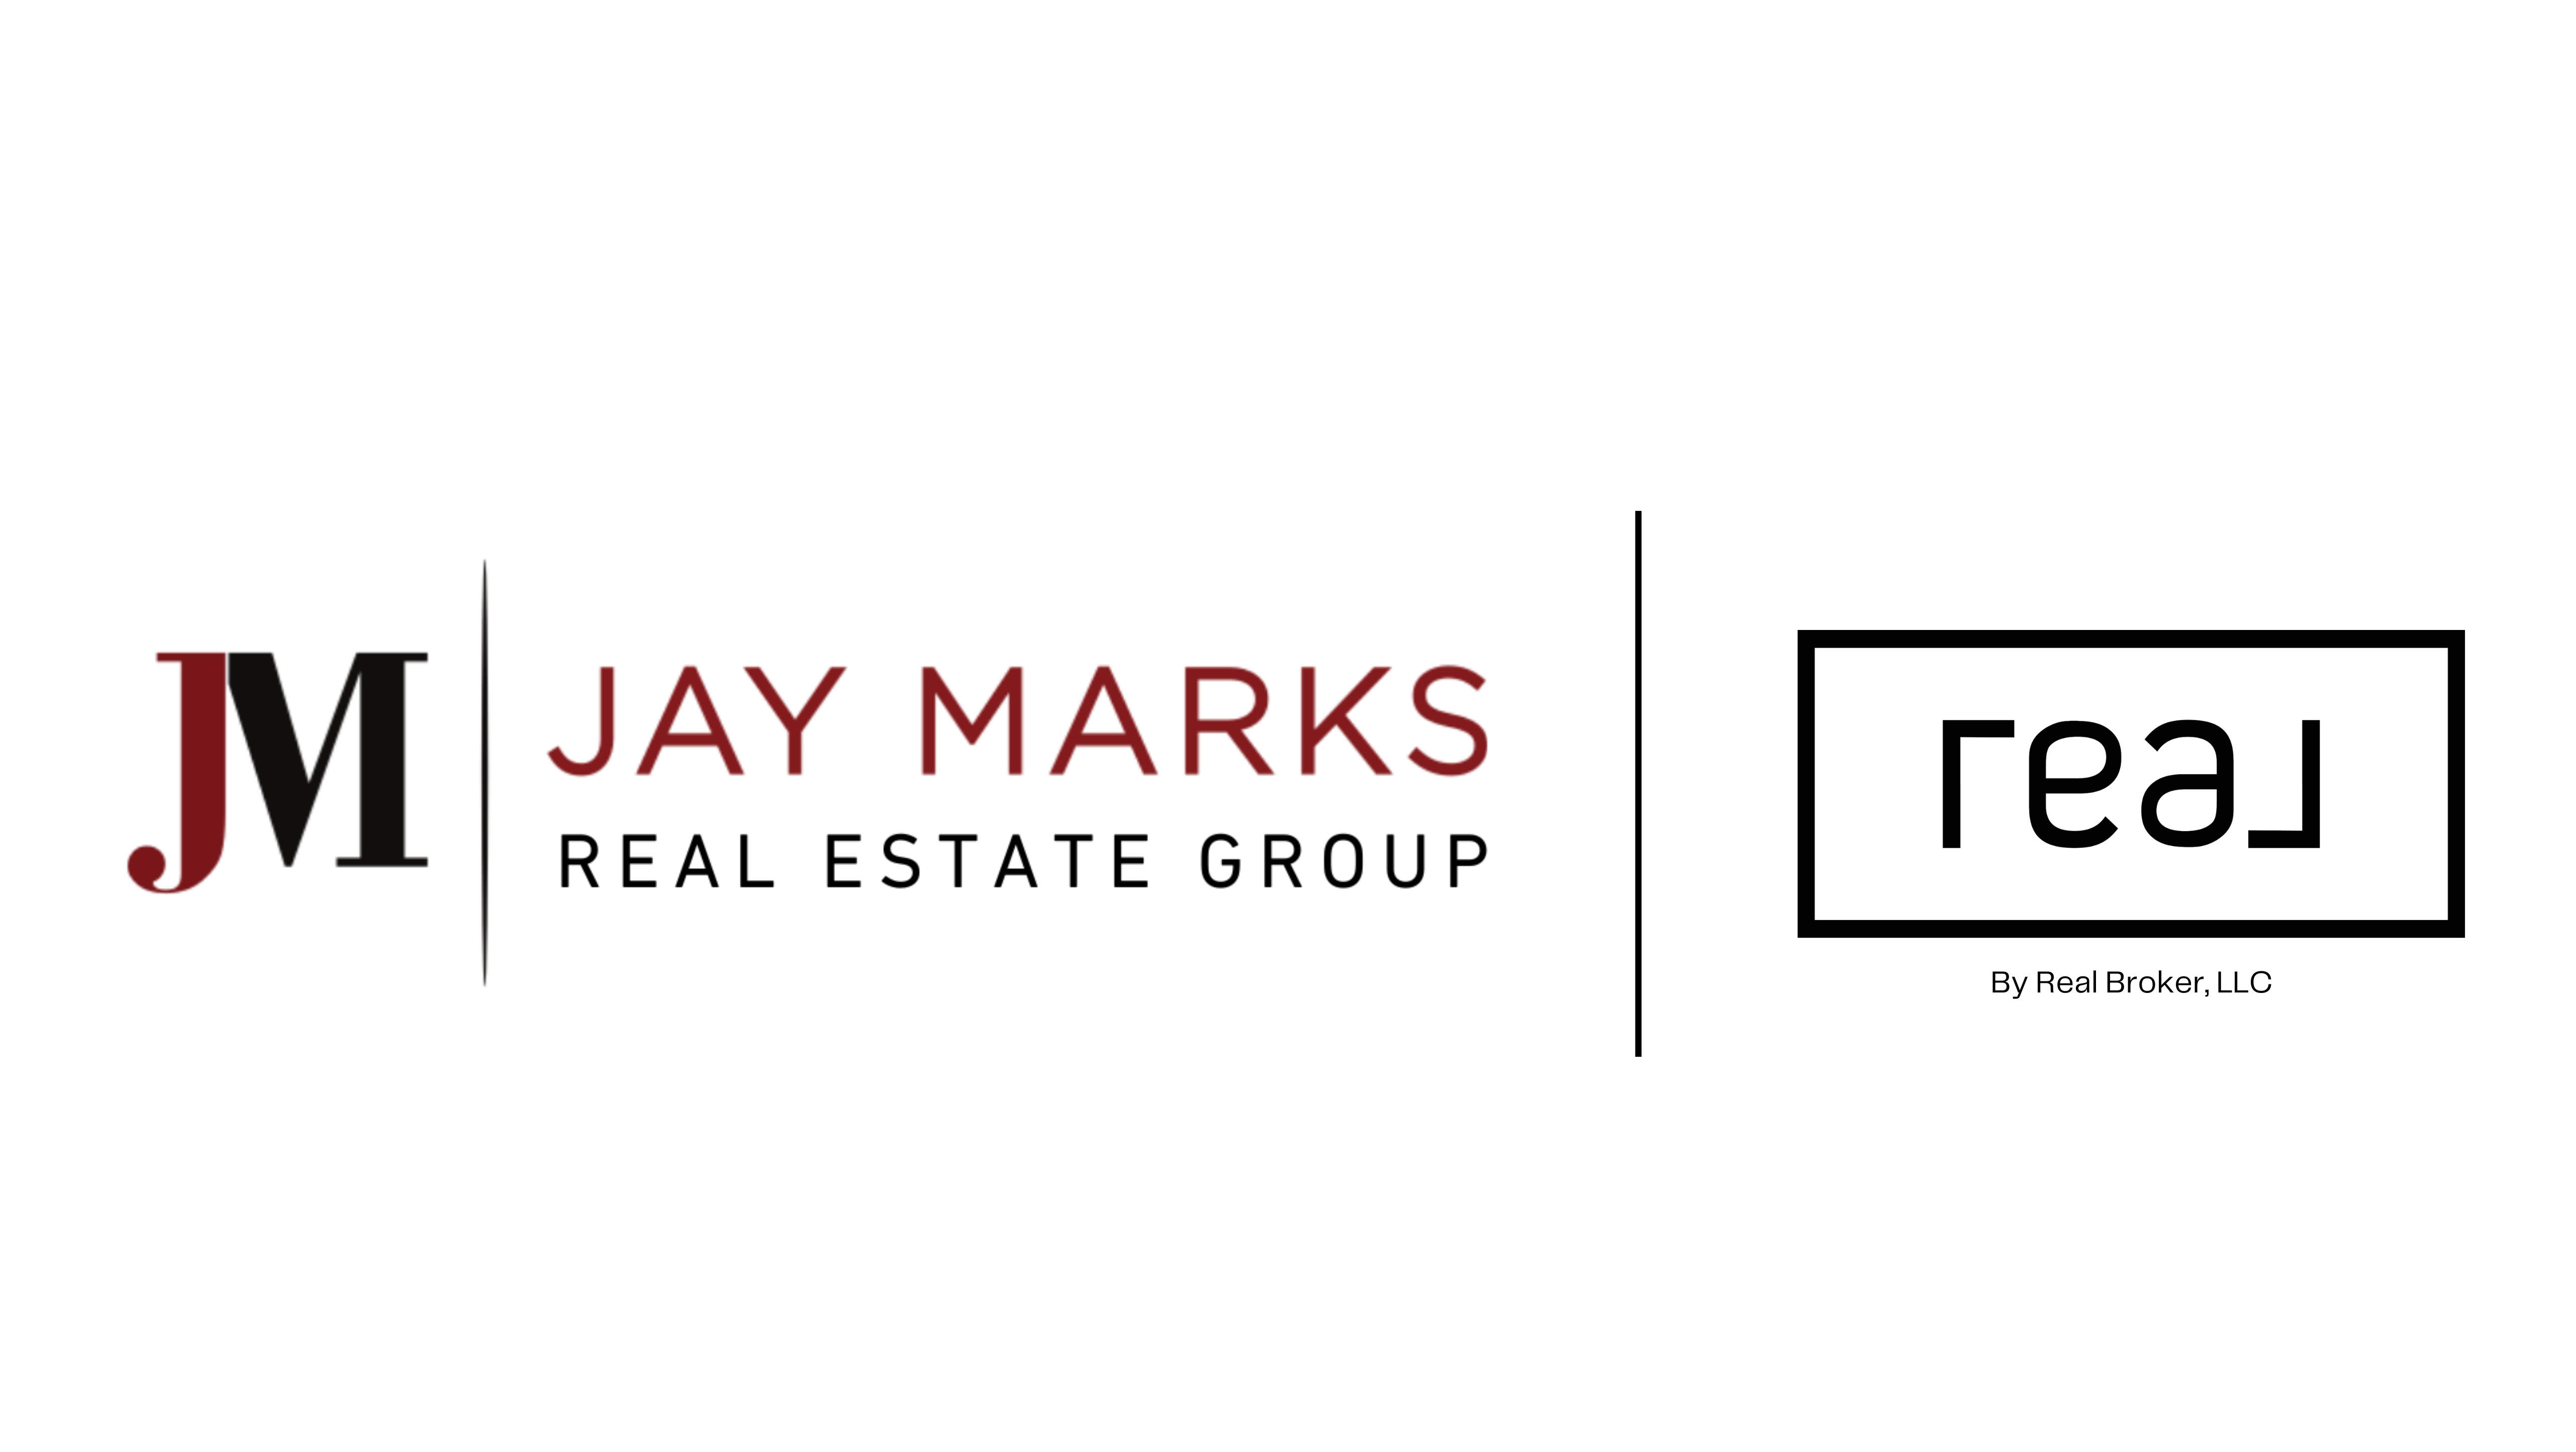 Jay Marks Real Estate Group | Brokered by Real, LLC